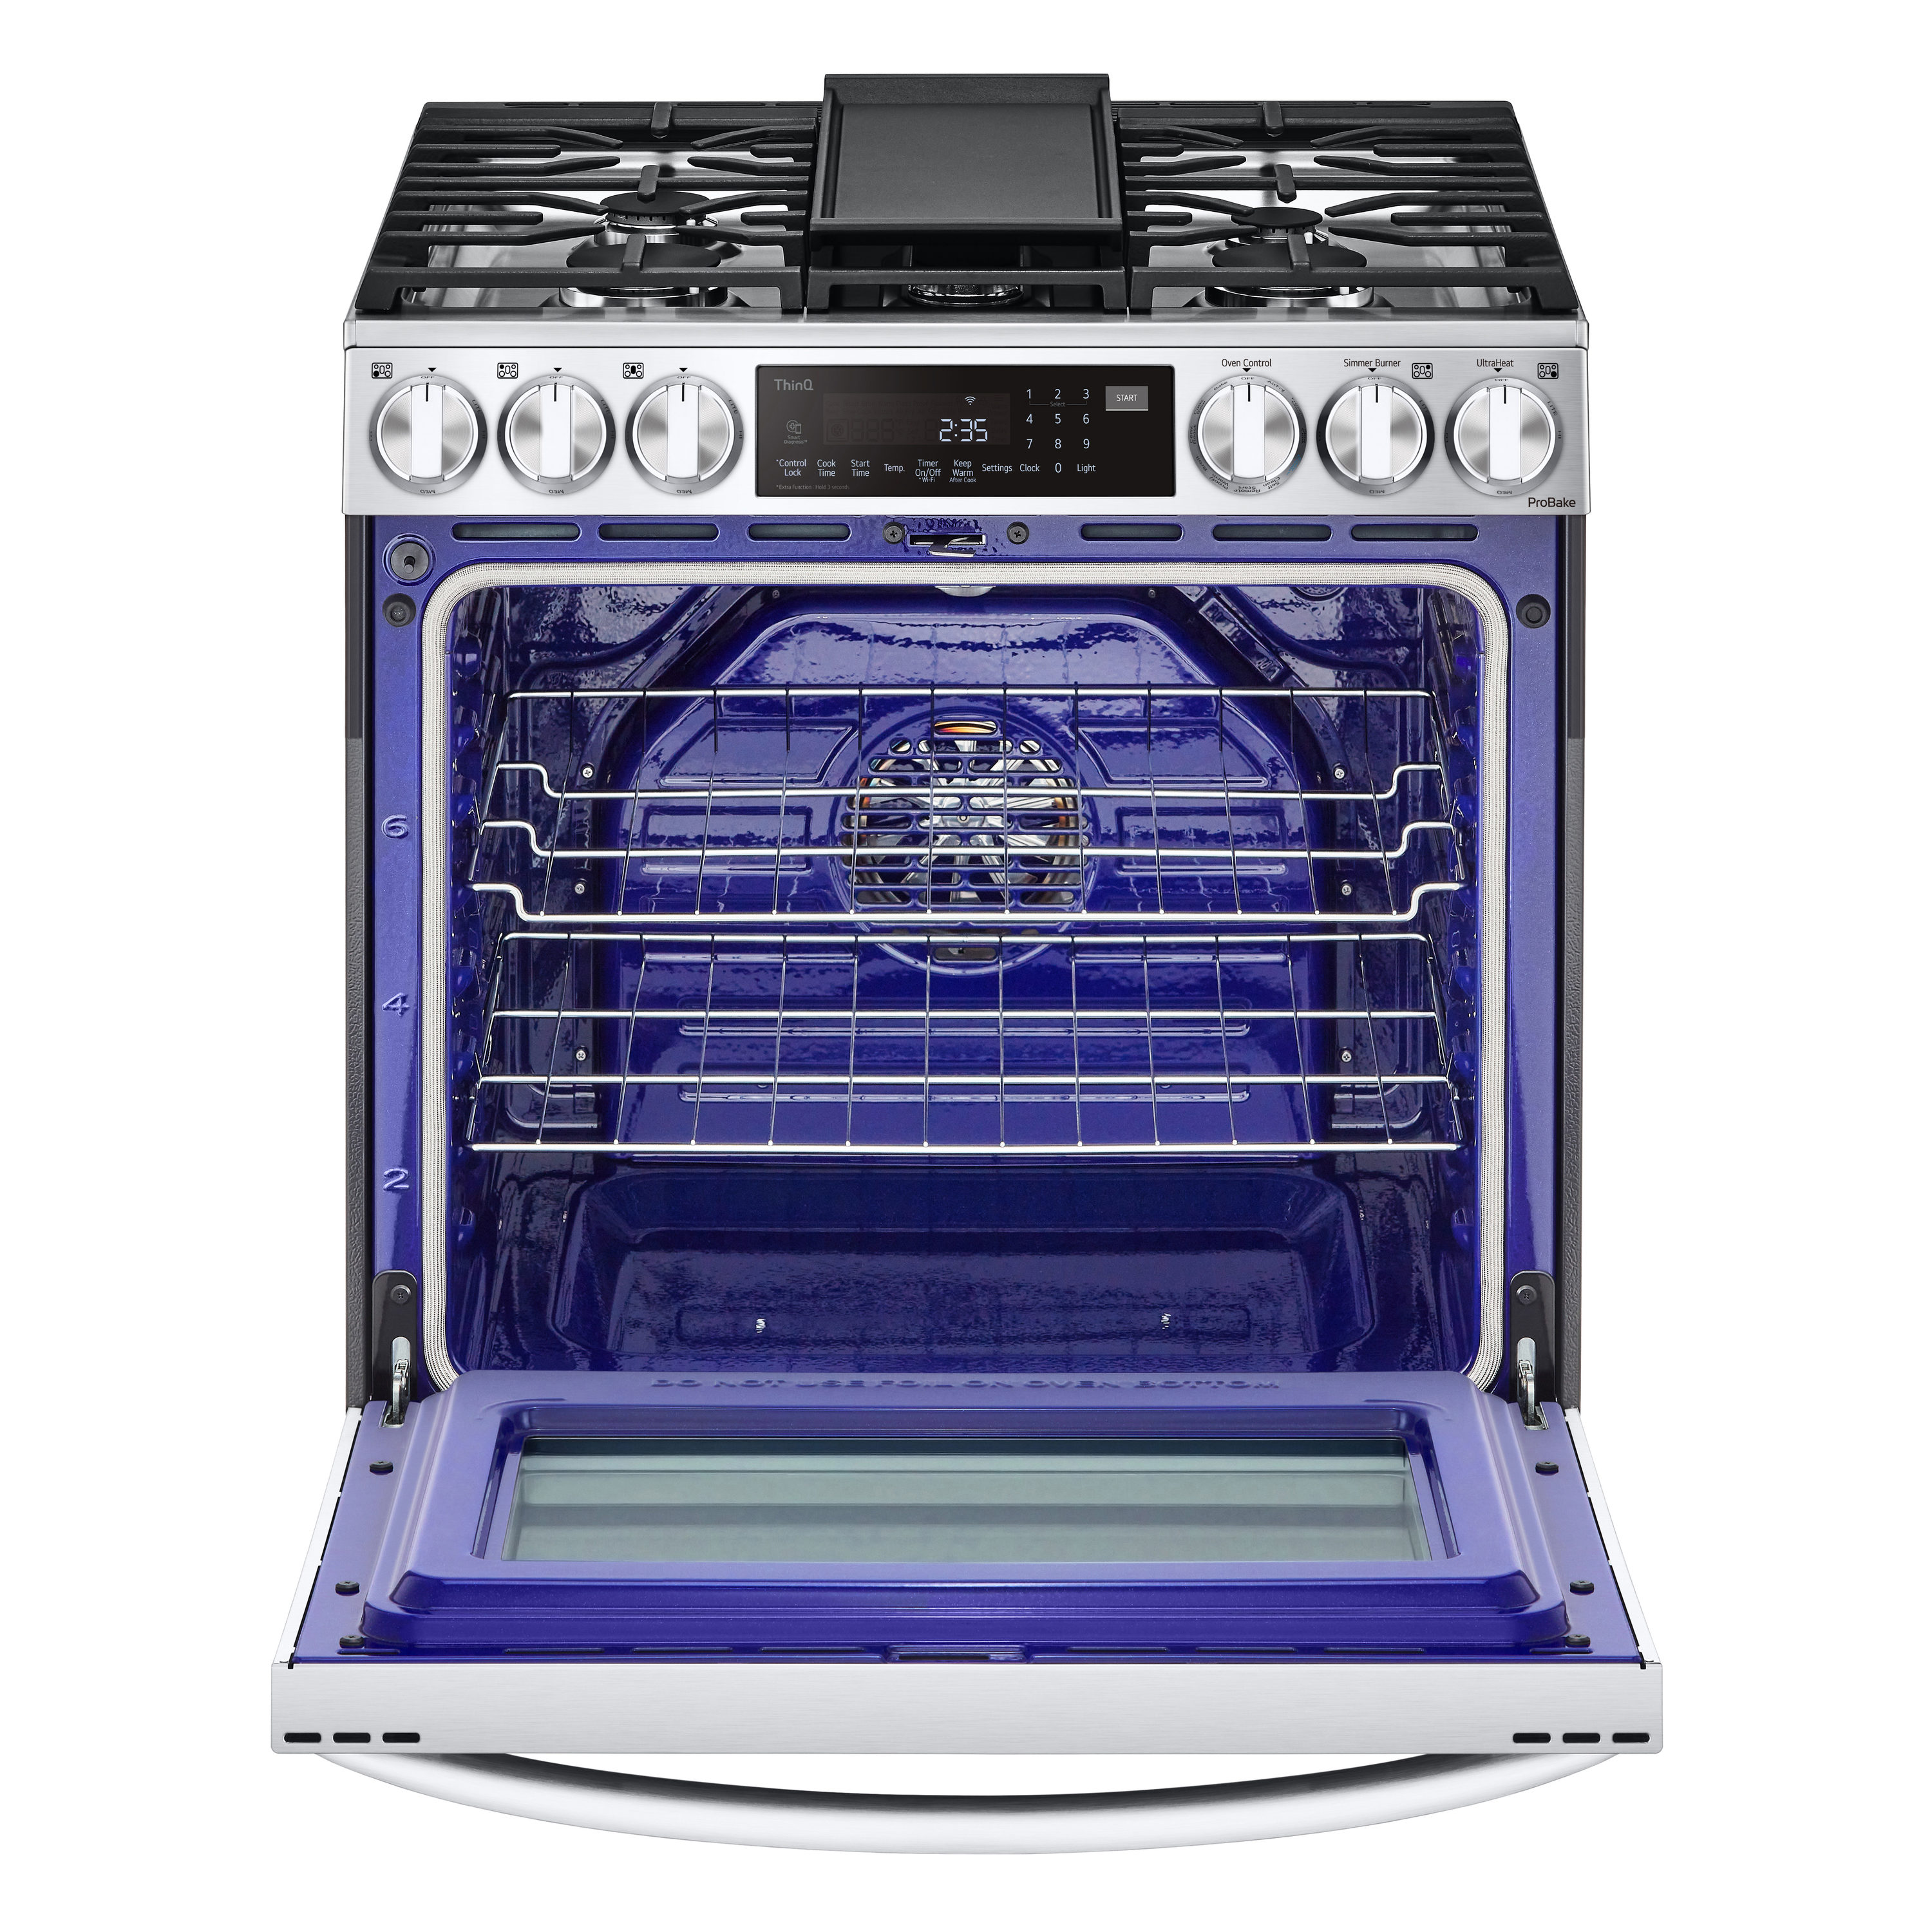 Air Fry Ovens - All the Options from LG, GE, Frigidaire, & More!